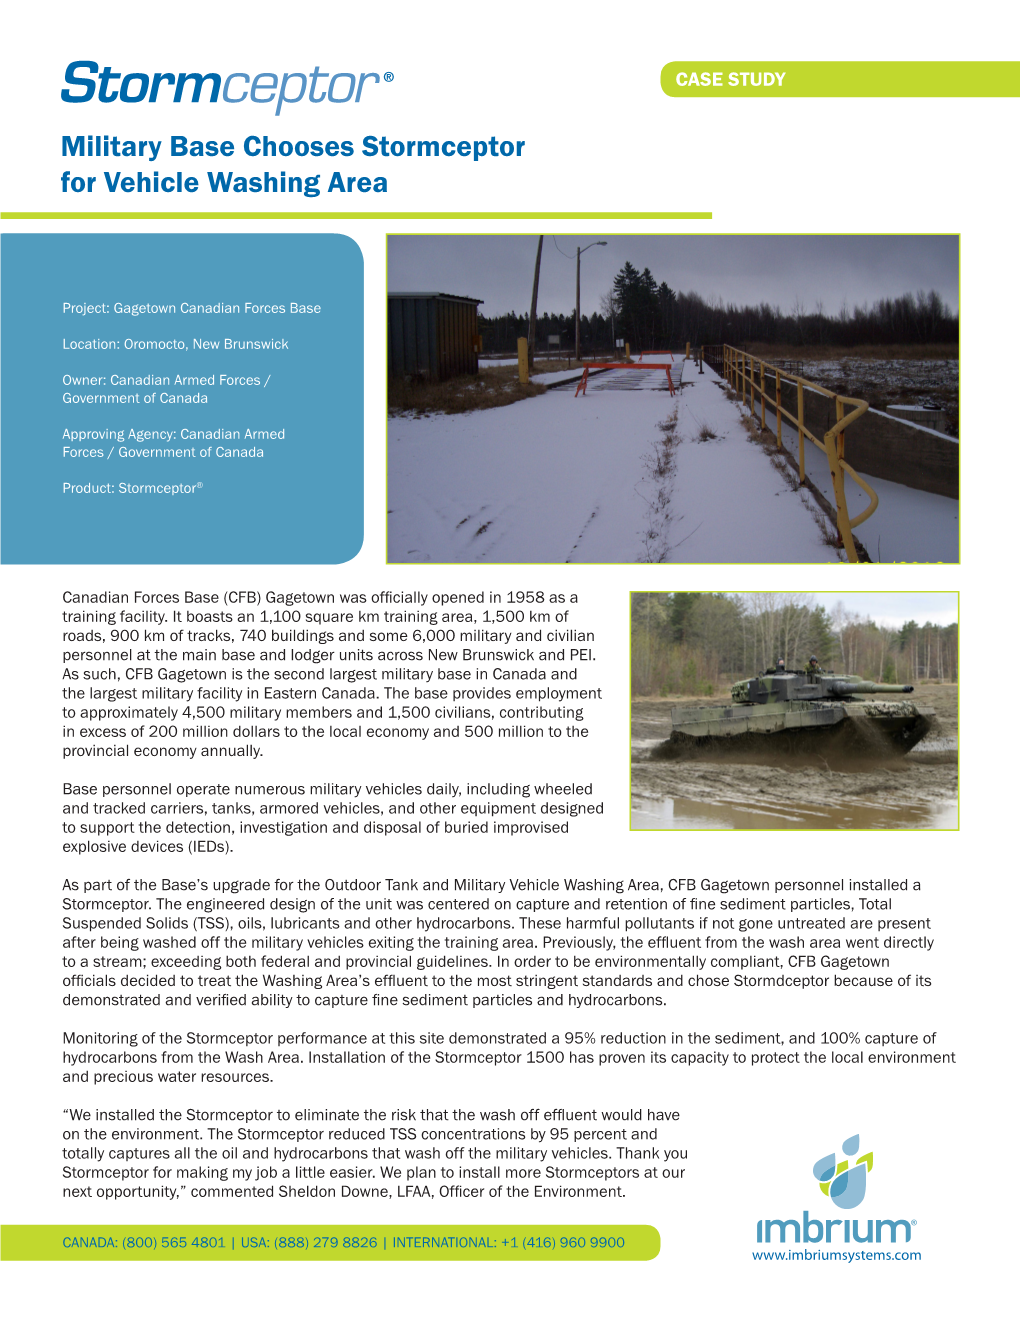 Military Base Chooses Stormceptor for Vehicle Washing Area